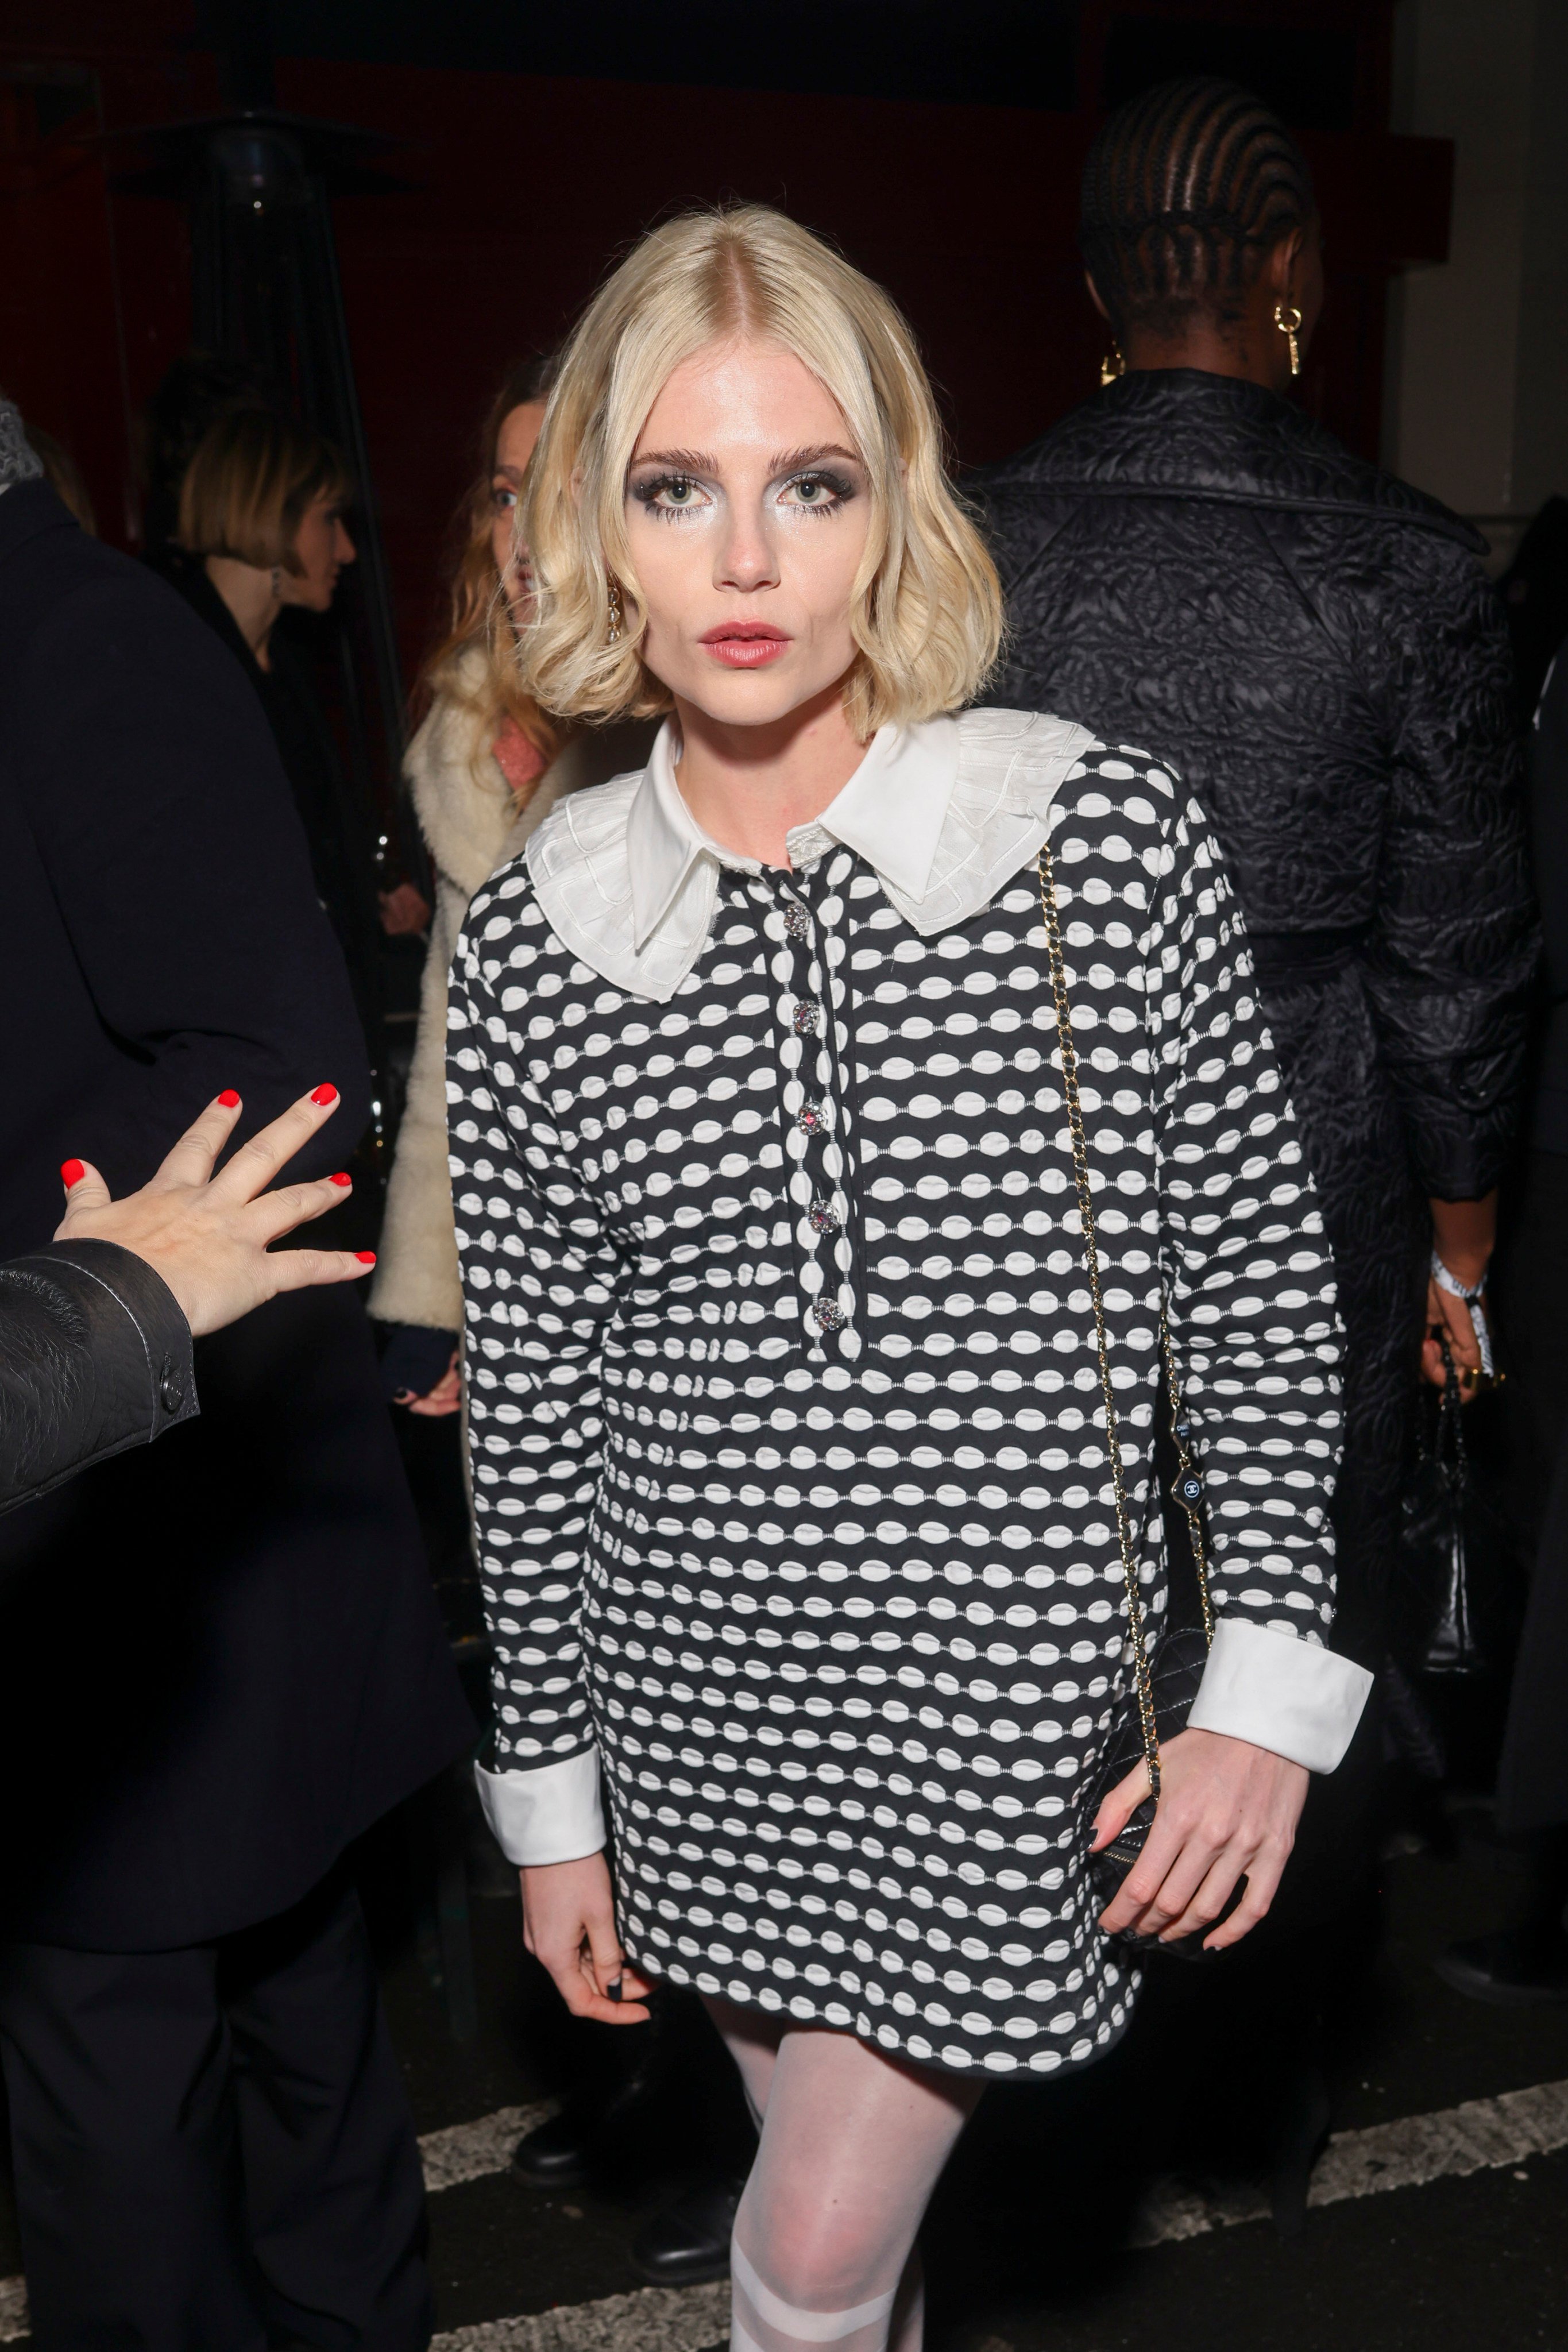 Lucy Boynton attends the Chanel Métiers d’Art show in Manchester, UK, on December 7. Photo: AP